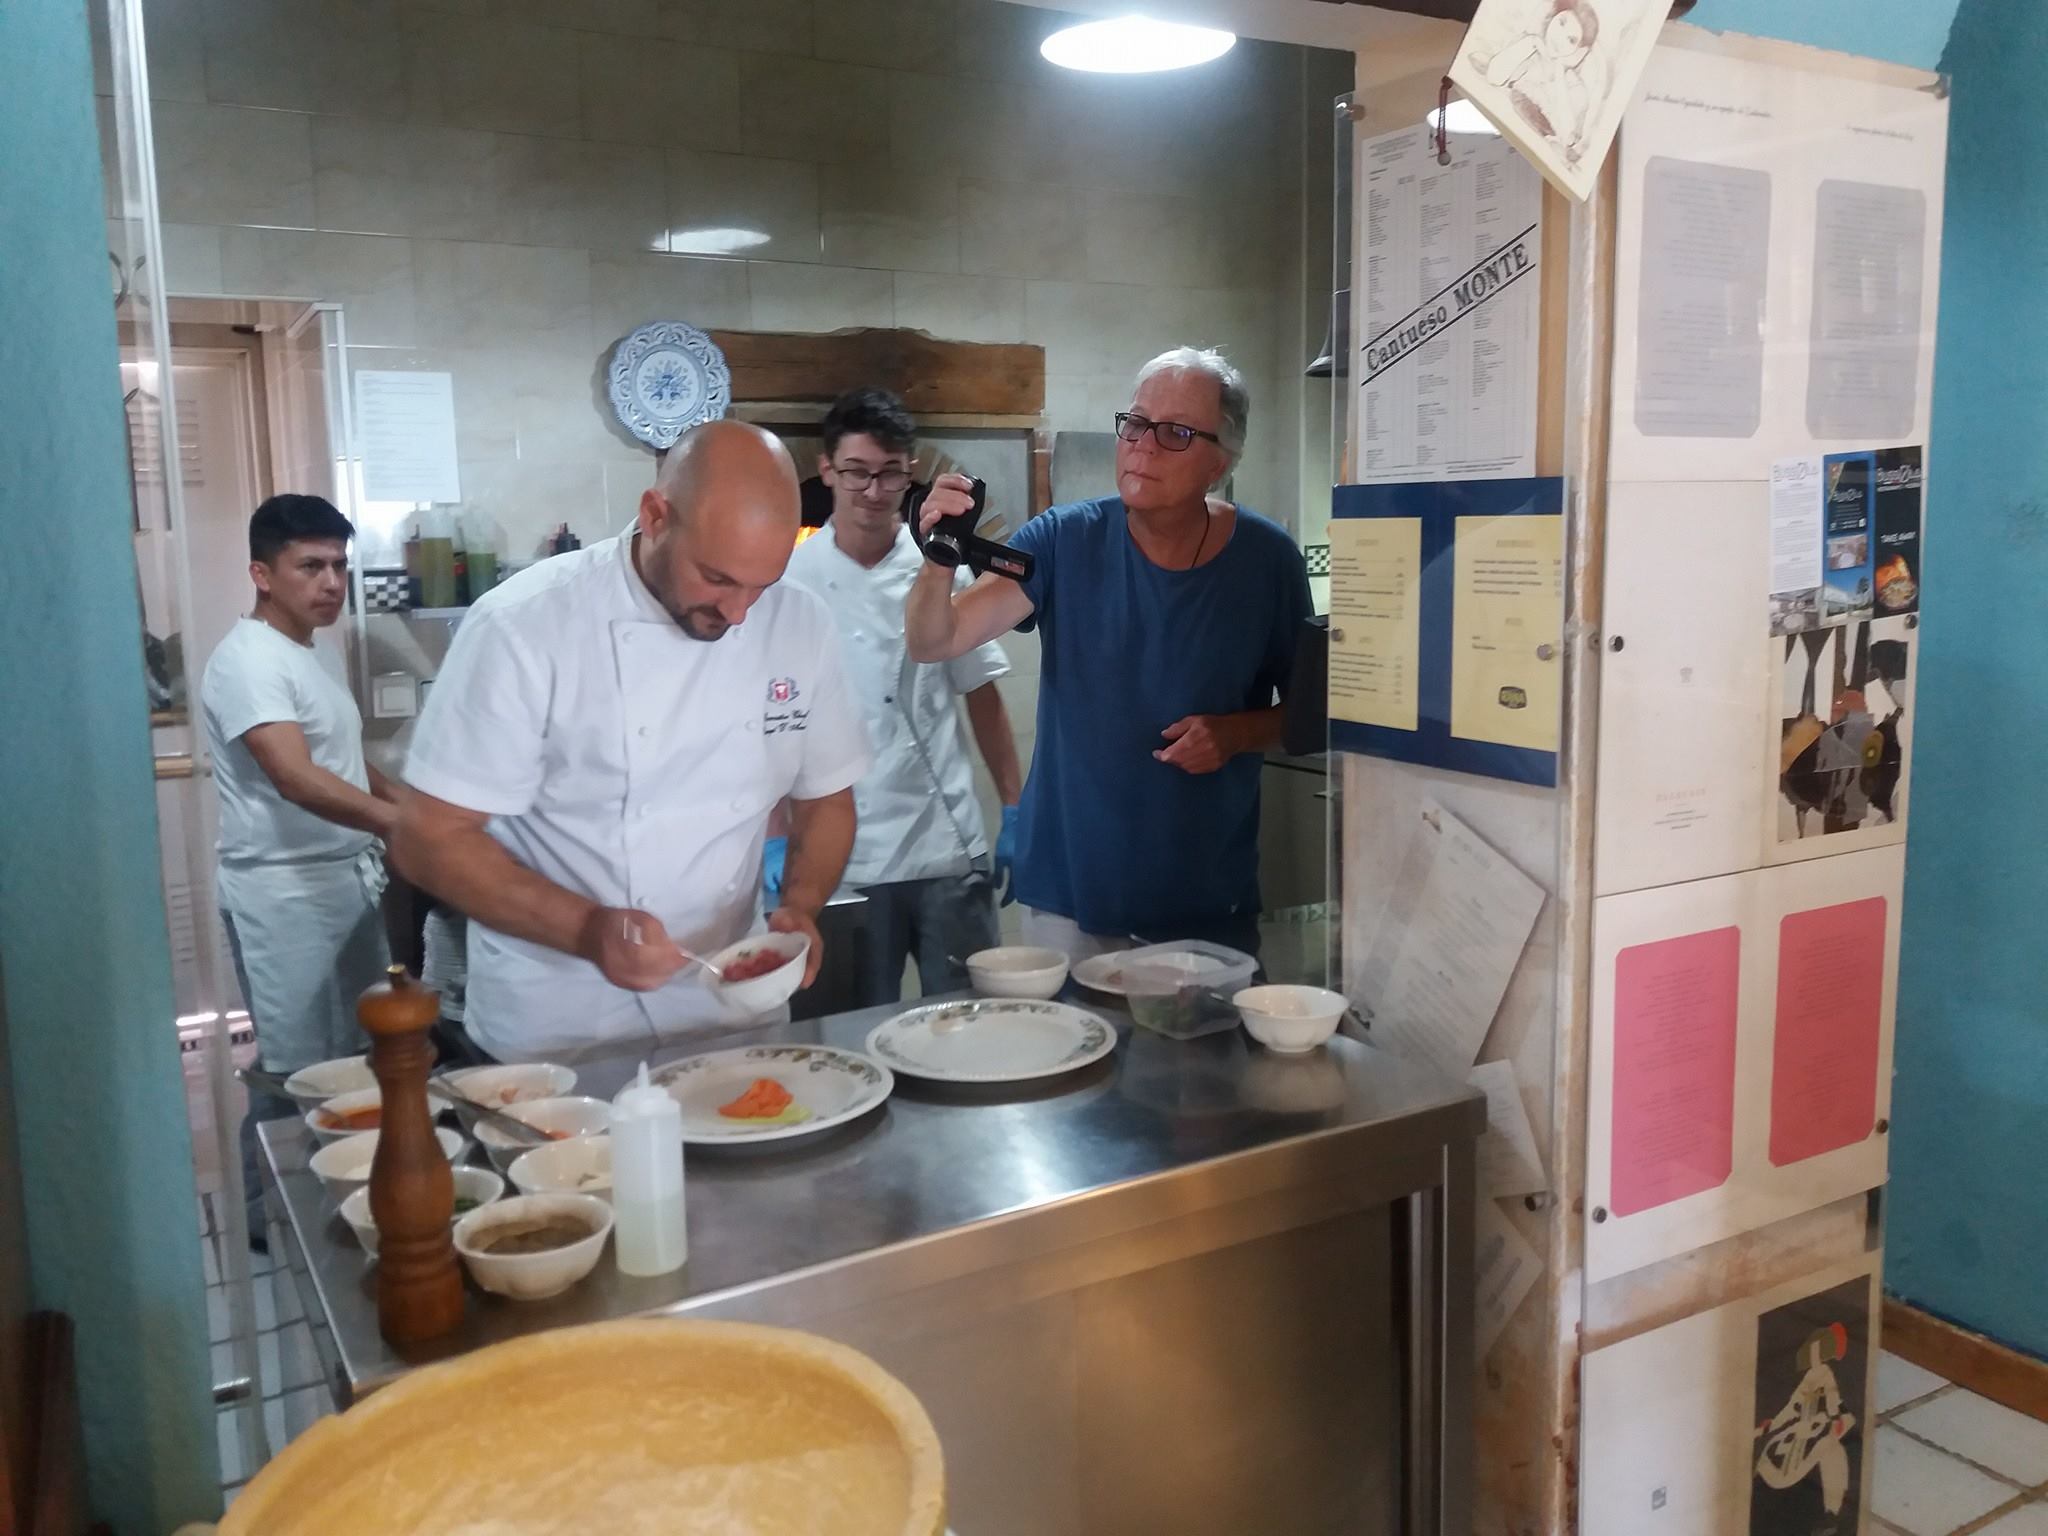 [Altea TV Documentary Being Filmed!] Filming delicious Italian dishes being prepared  ESCAPE='HTML'